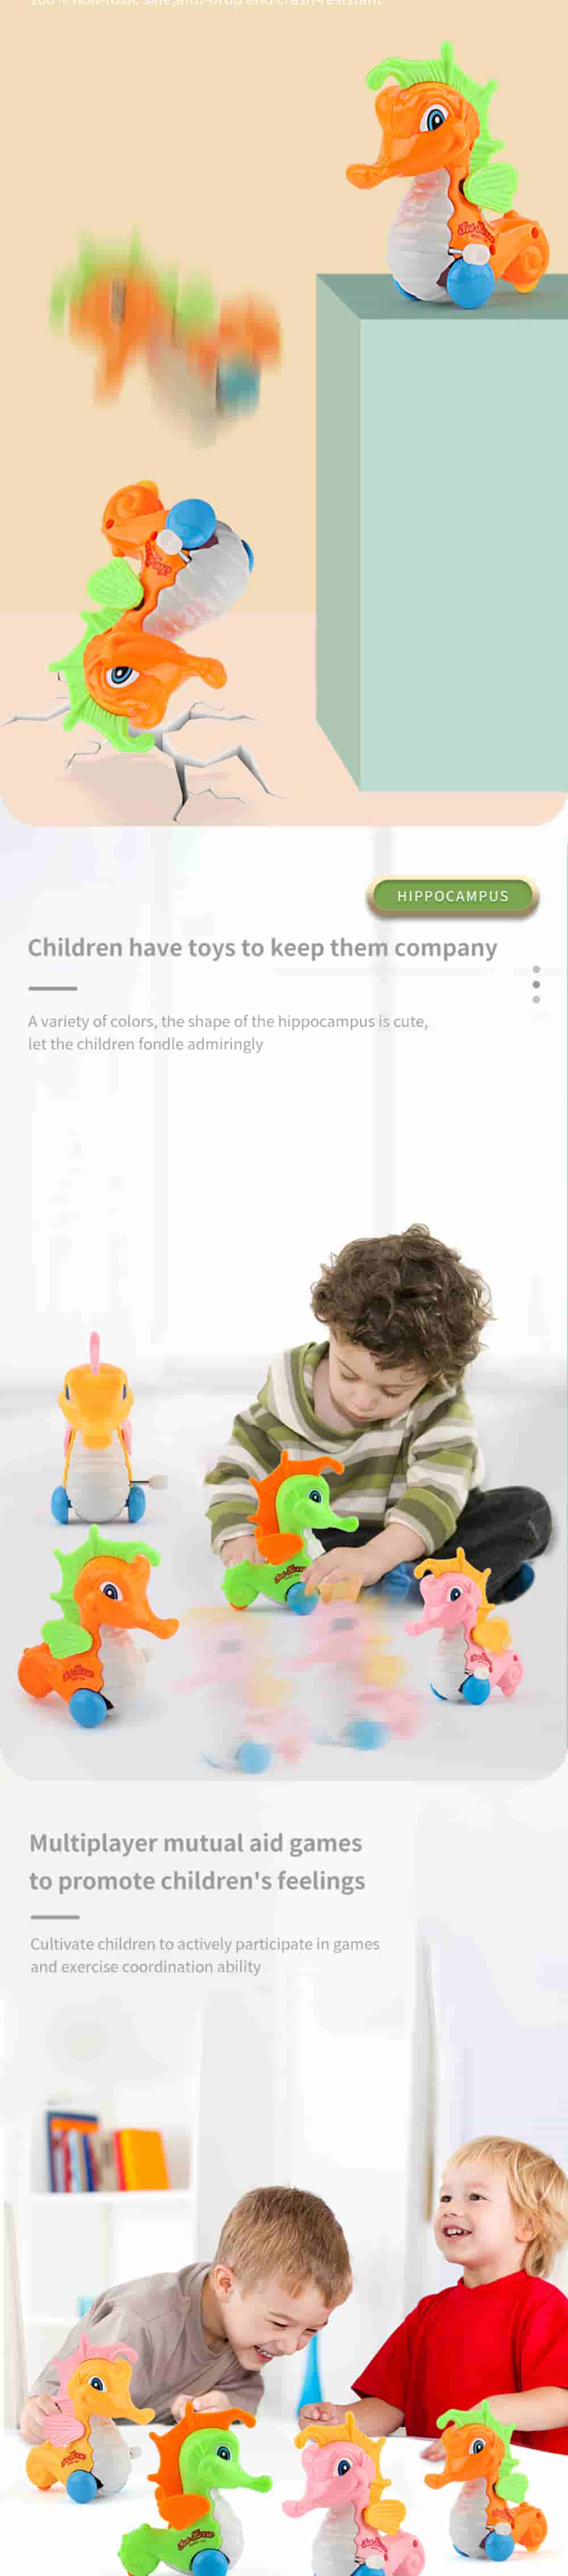 wind up hippocampus toys_03